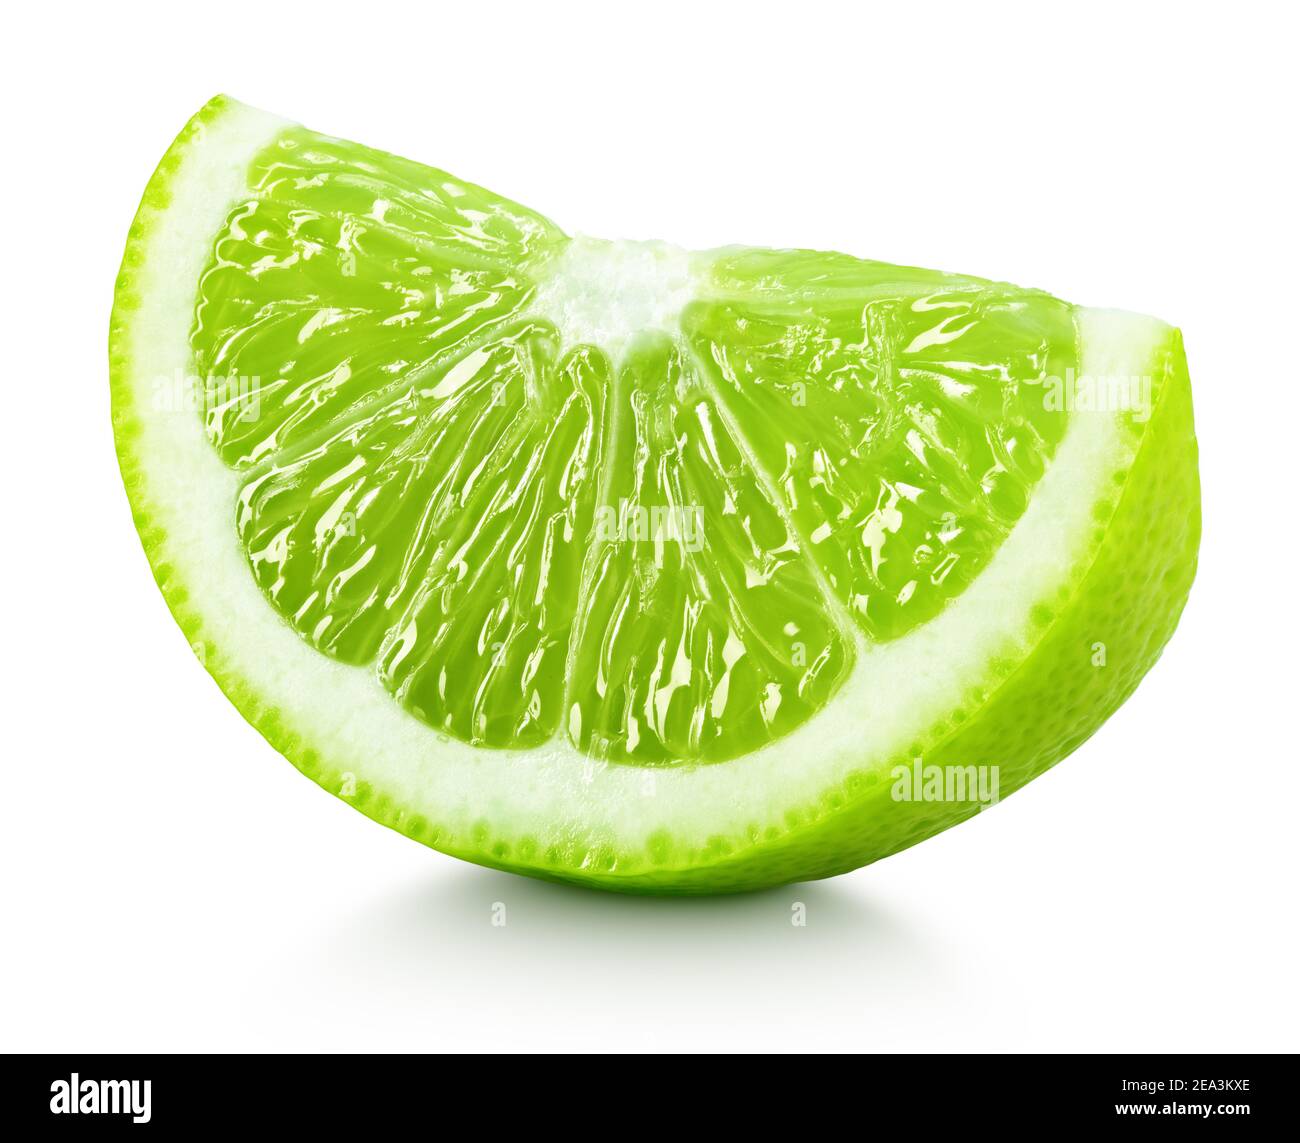 Ripe wedge of green lime citrus fruit isolated on white background. Lime slice with clipping path Stock Photo